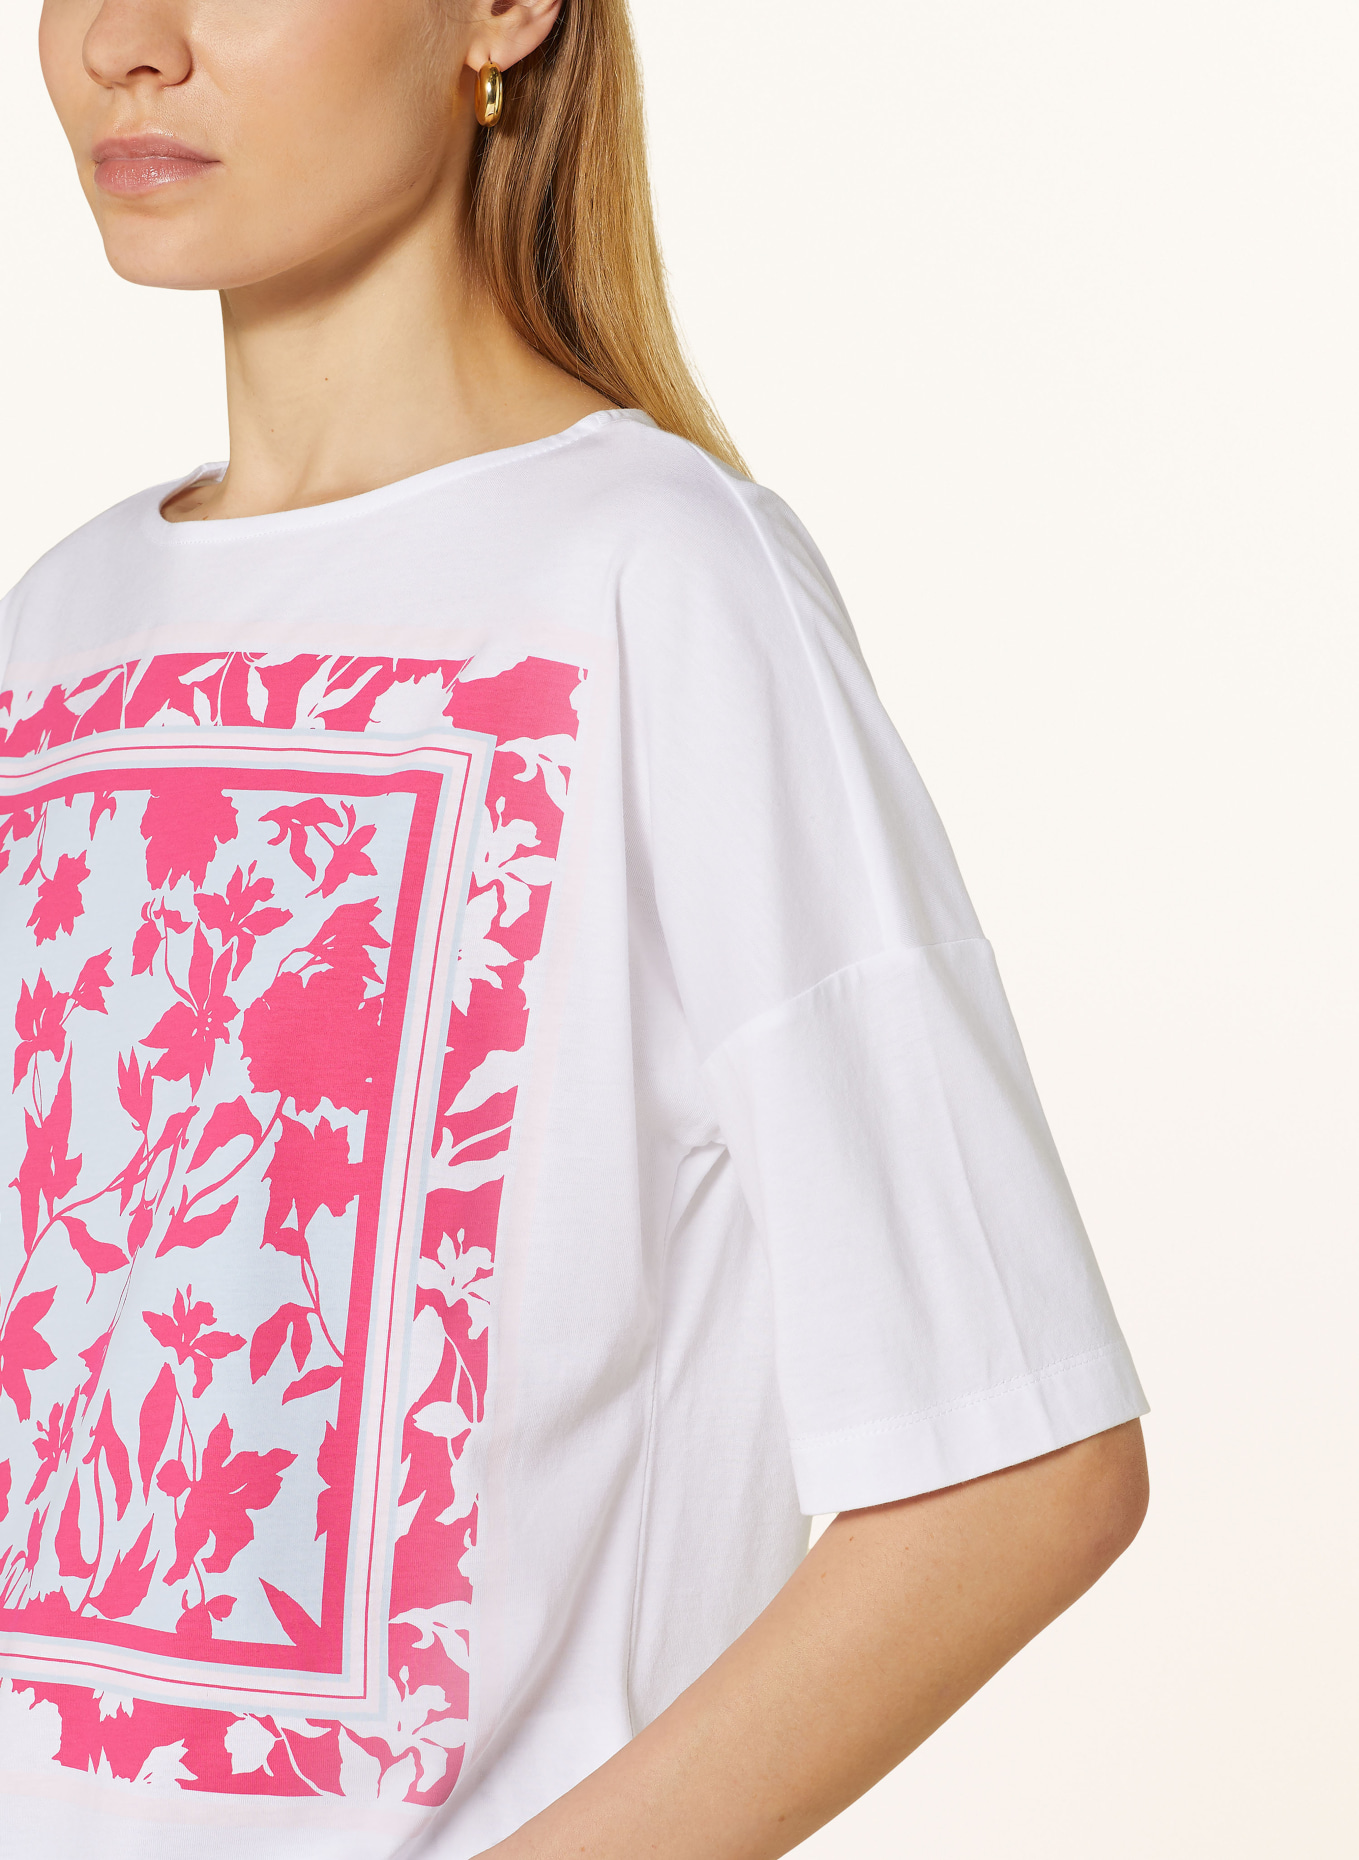 MAERZ MUENCHEN T-shirt, Color: WHITE/ PINK/ LIGHT BLUE (Image 4)